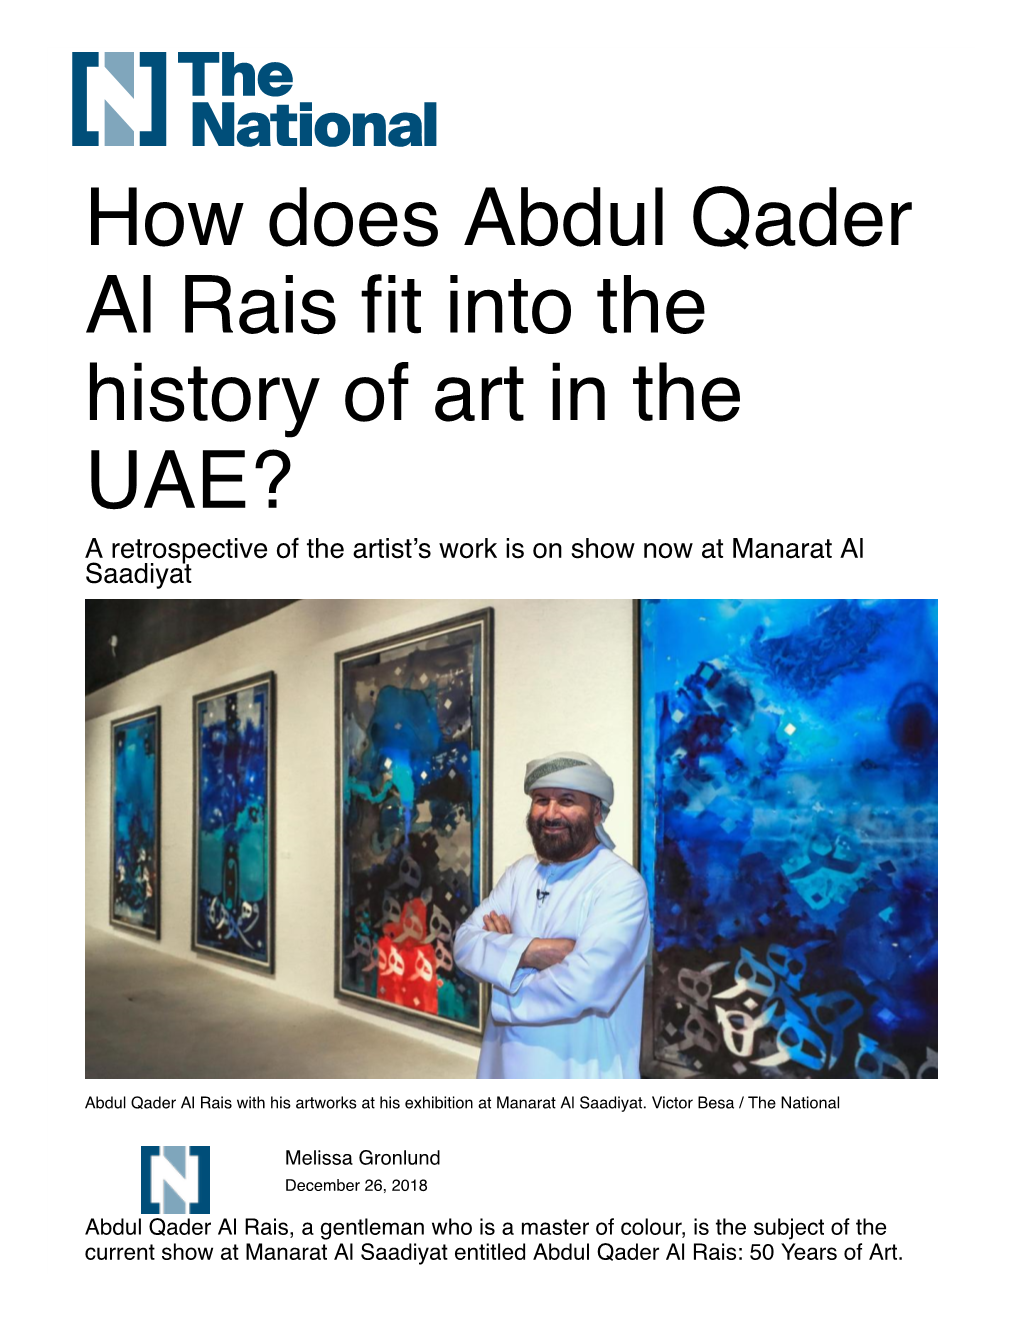 How Does Abdul Qader Al Rais Fit Into the History of Art in the UAE?